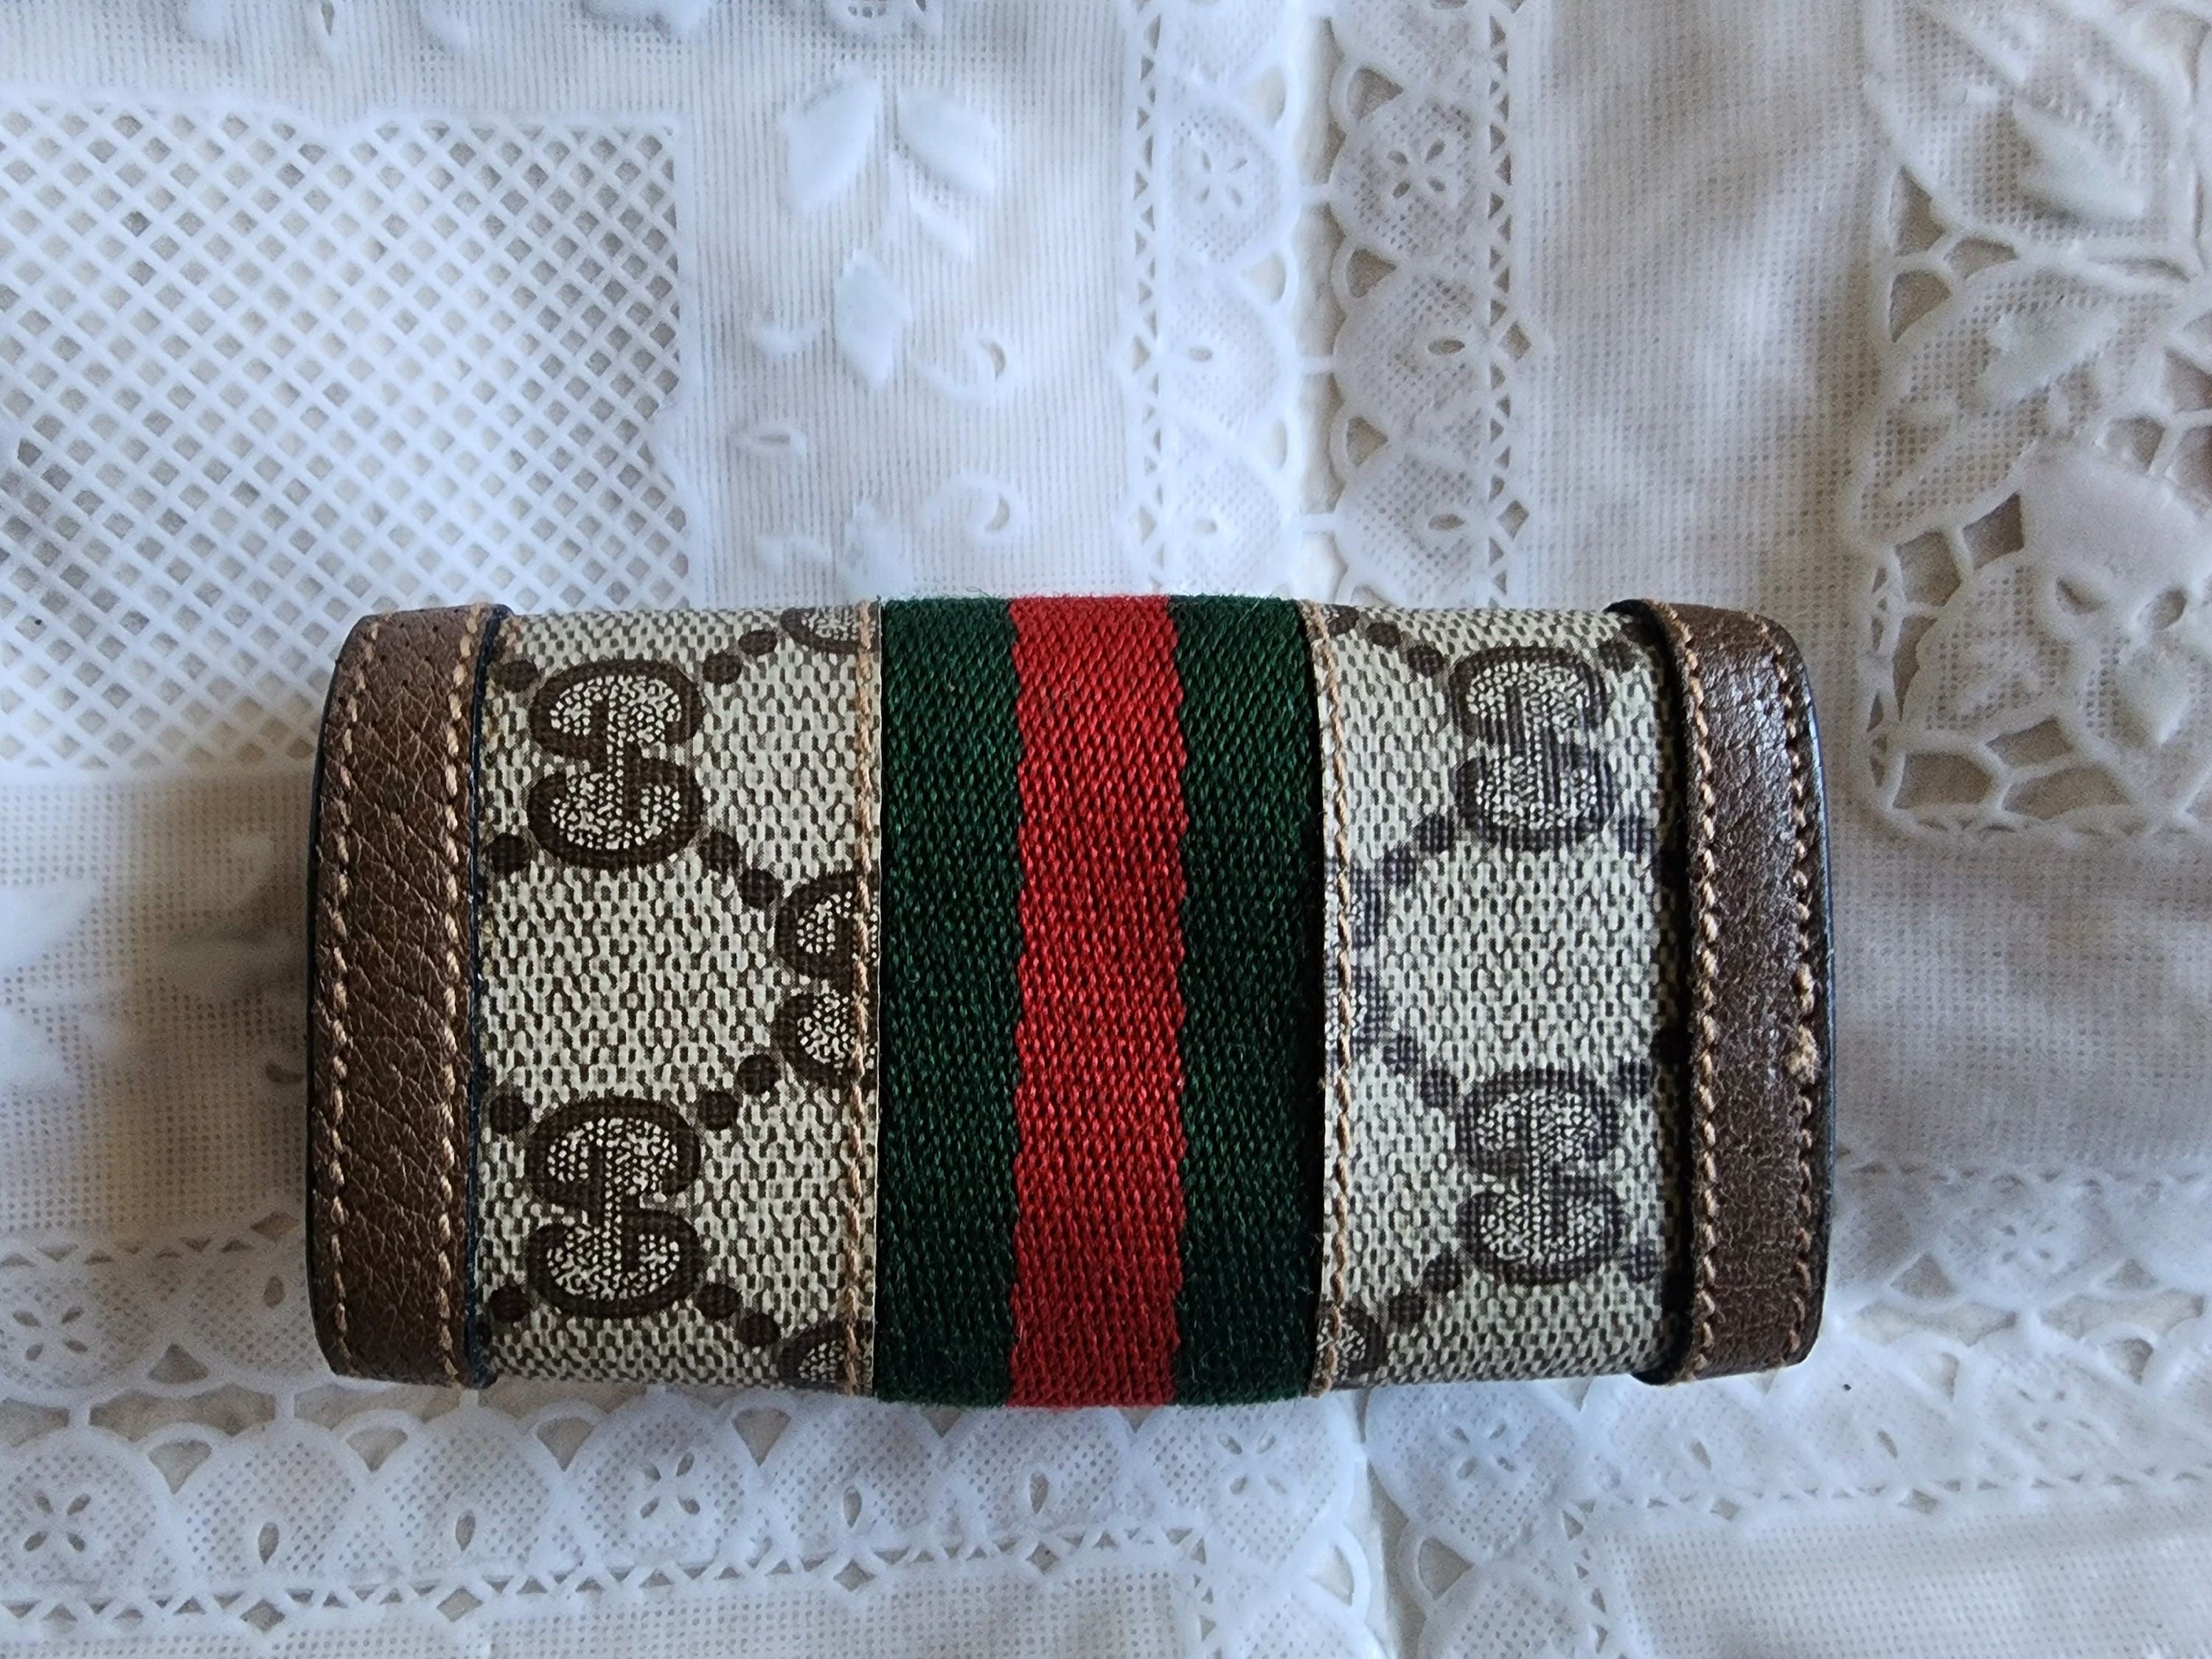 Brand New Vintage Authentic Gucci Key Case 